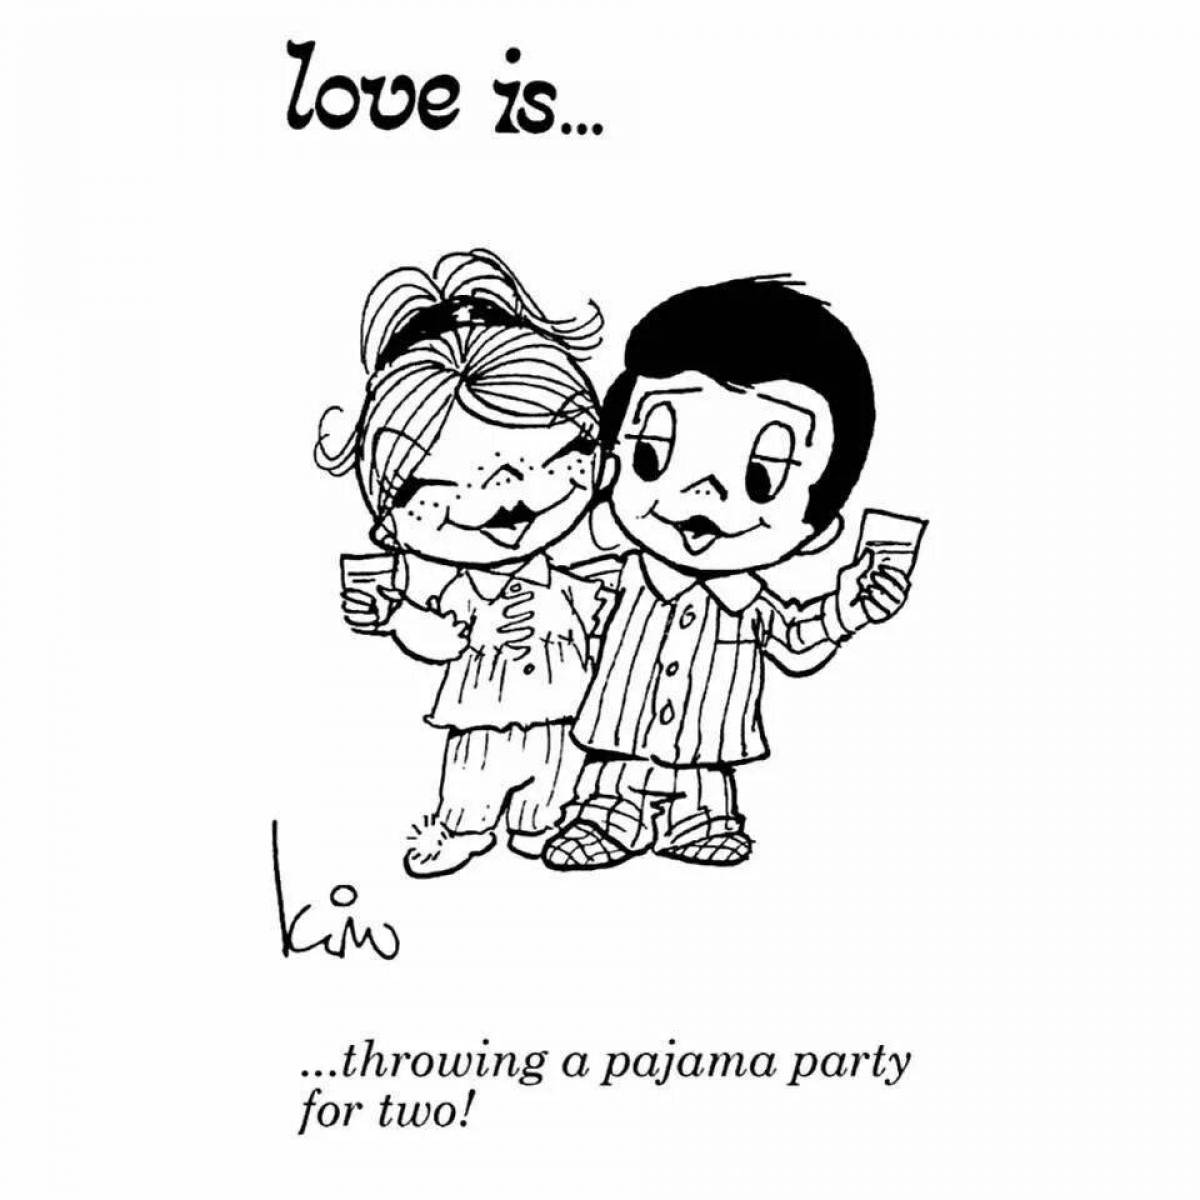 Love is soul coloring book